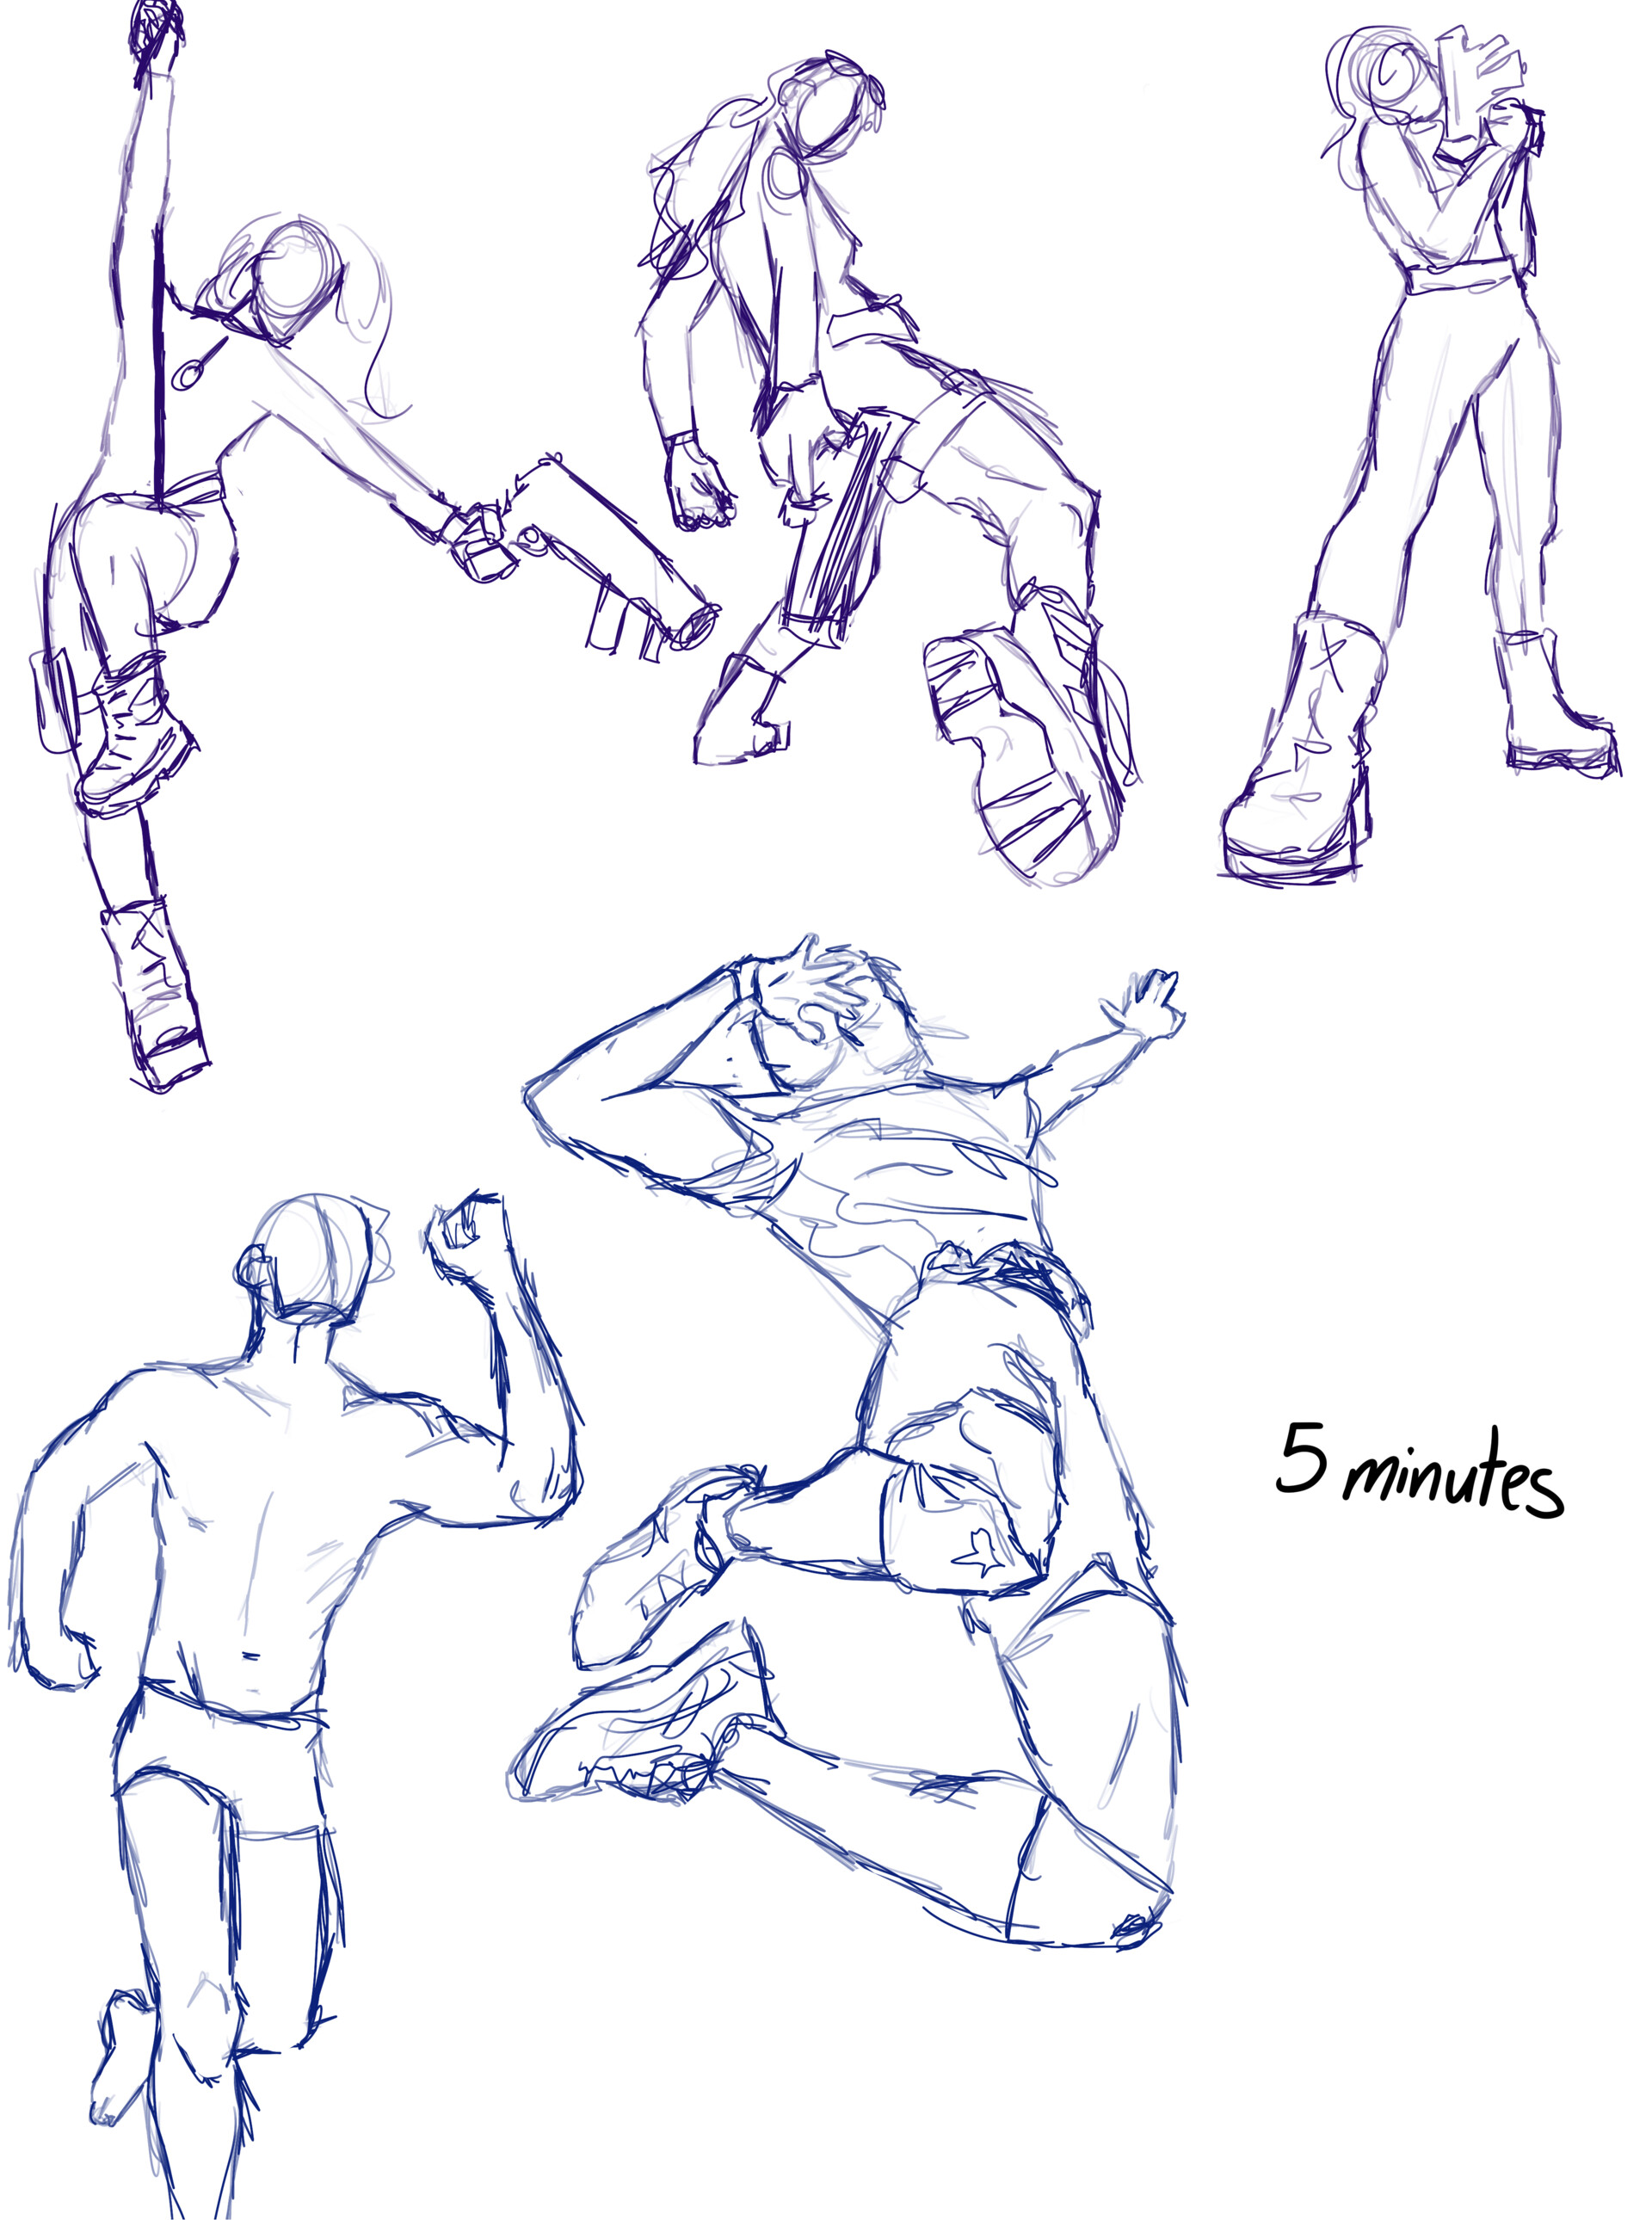 Action Poses Practice 3 by Moongaze14 on DeviantArt